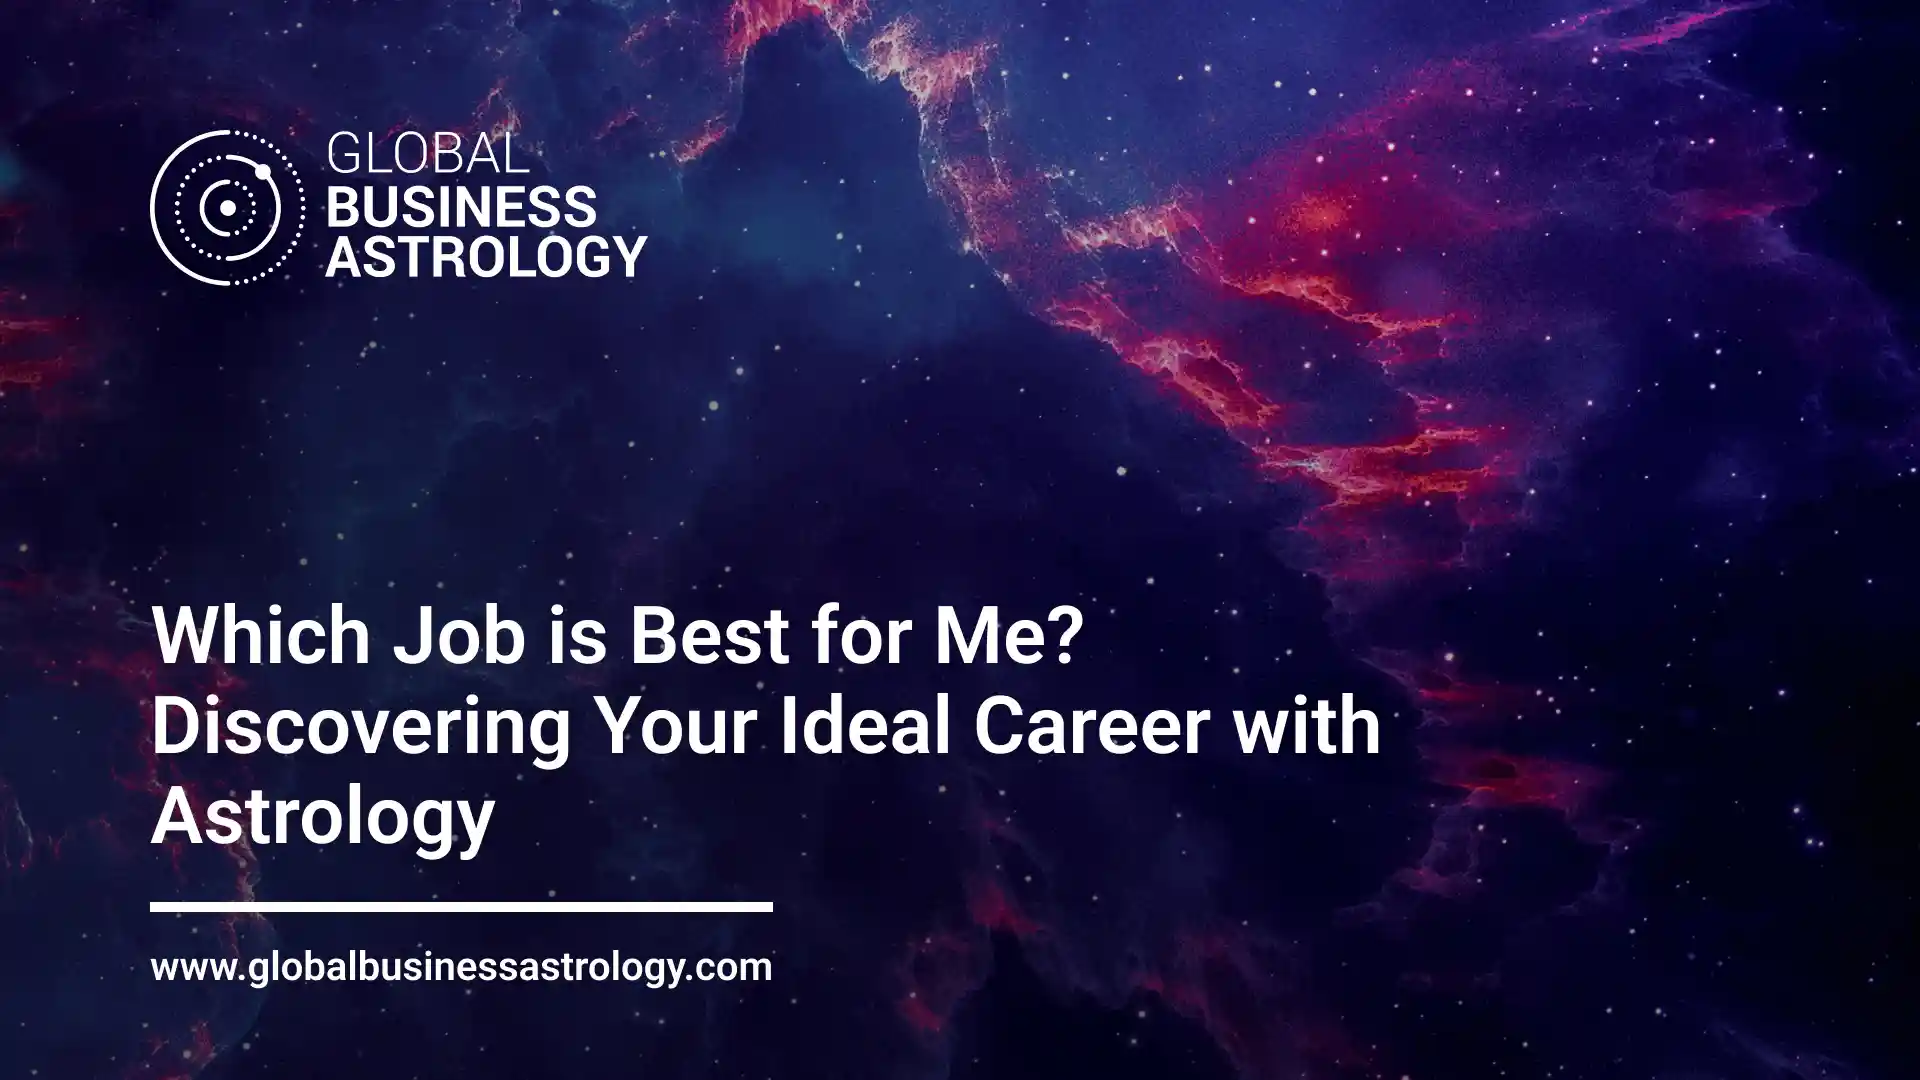 Which Job is Best for Me? Discovering Your Ideal Career with Astrology